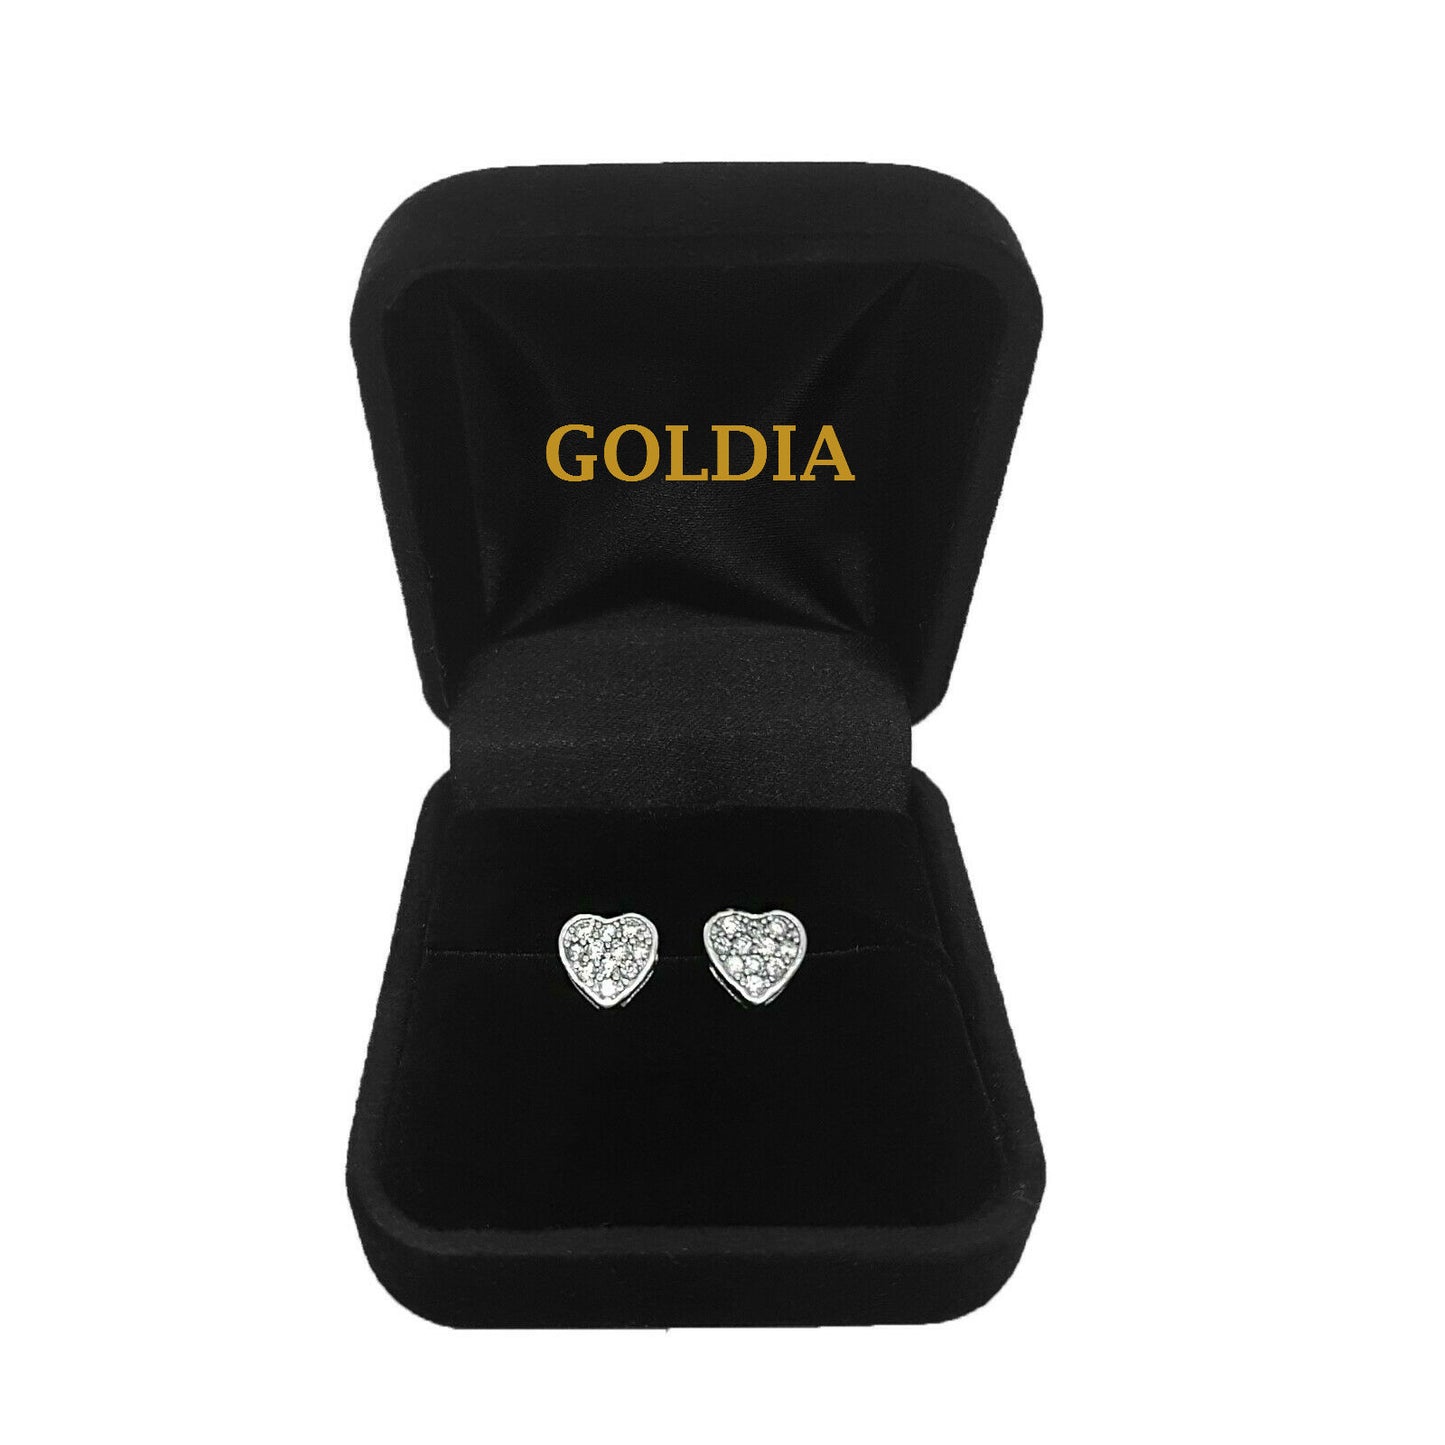 1.0 Carat TW AGS Certified Round Diamond Solitaire Stud Earrings in 14K White Gold